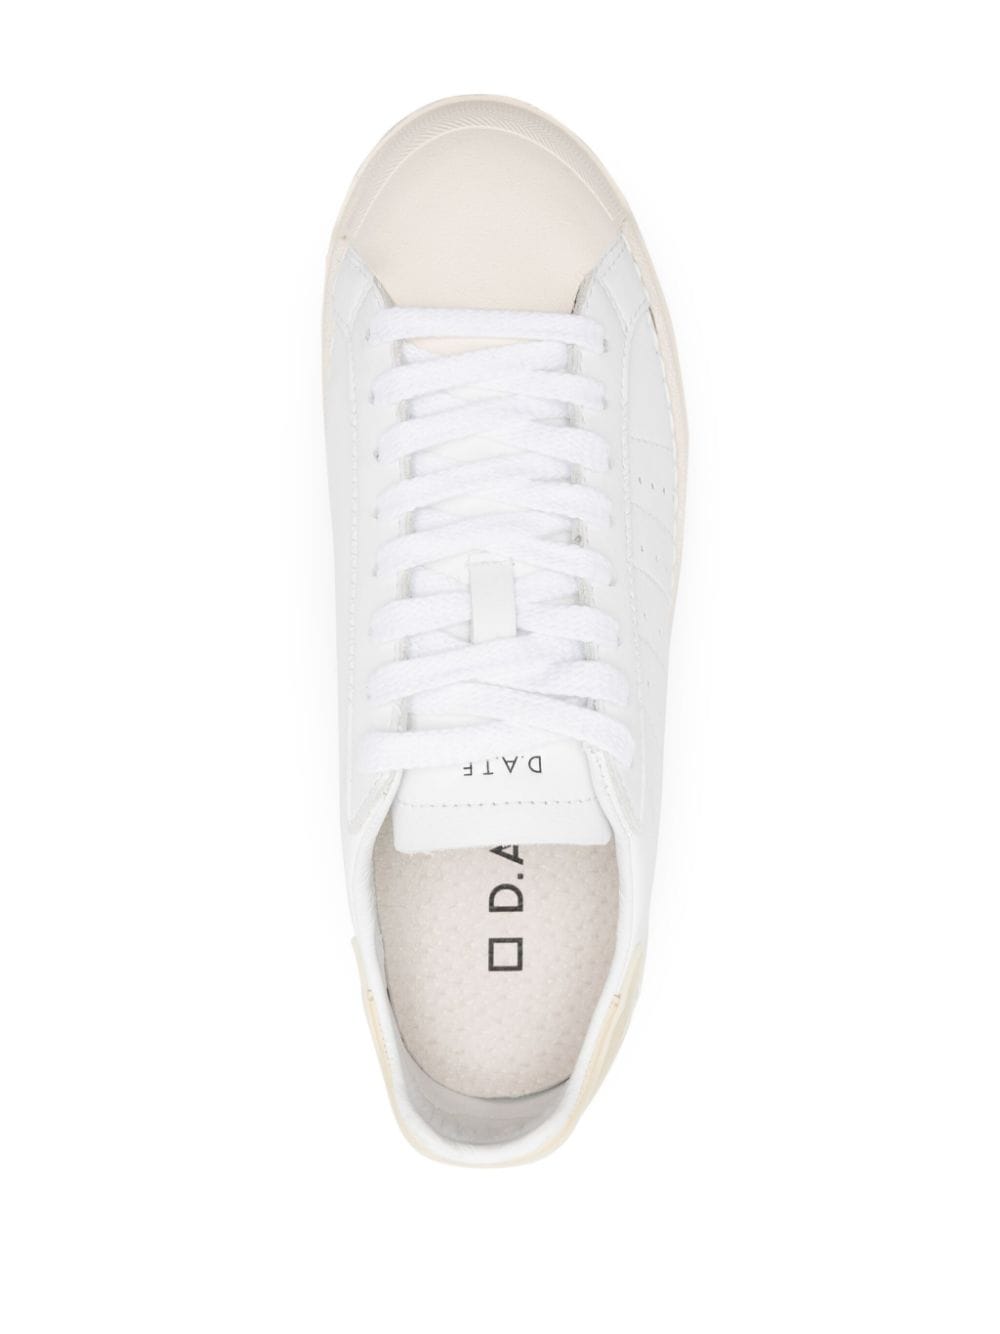 Shop Date Base Island Leather Sneakers In Weiss